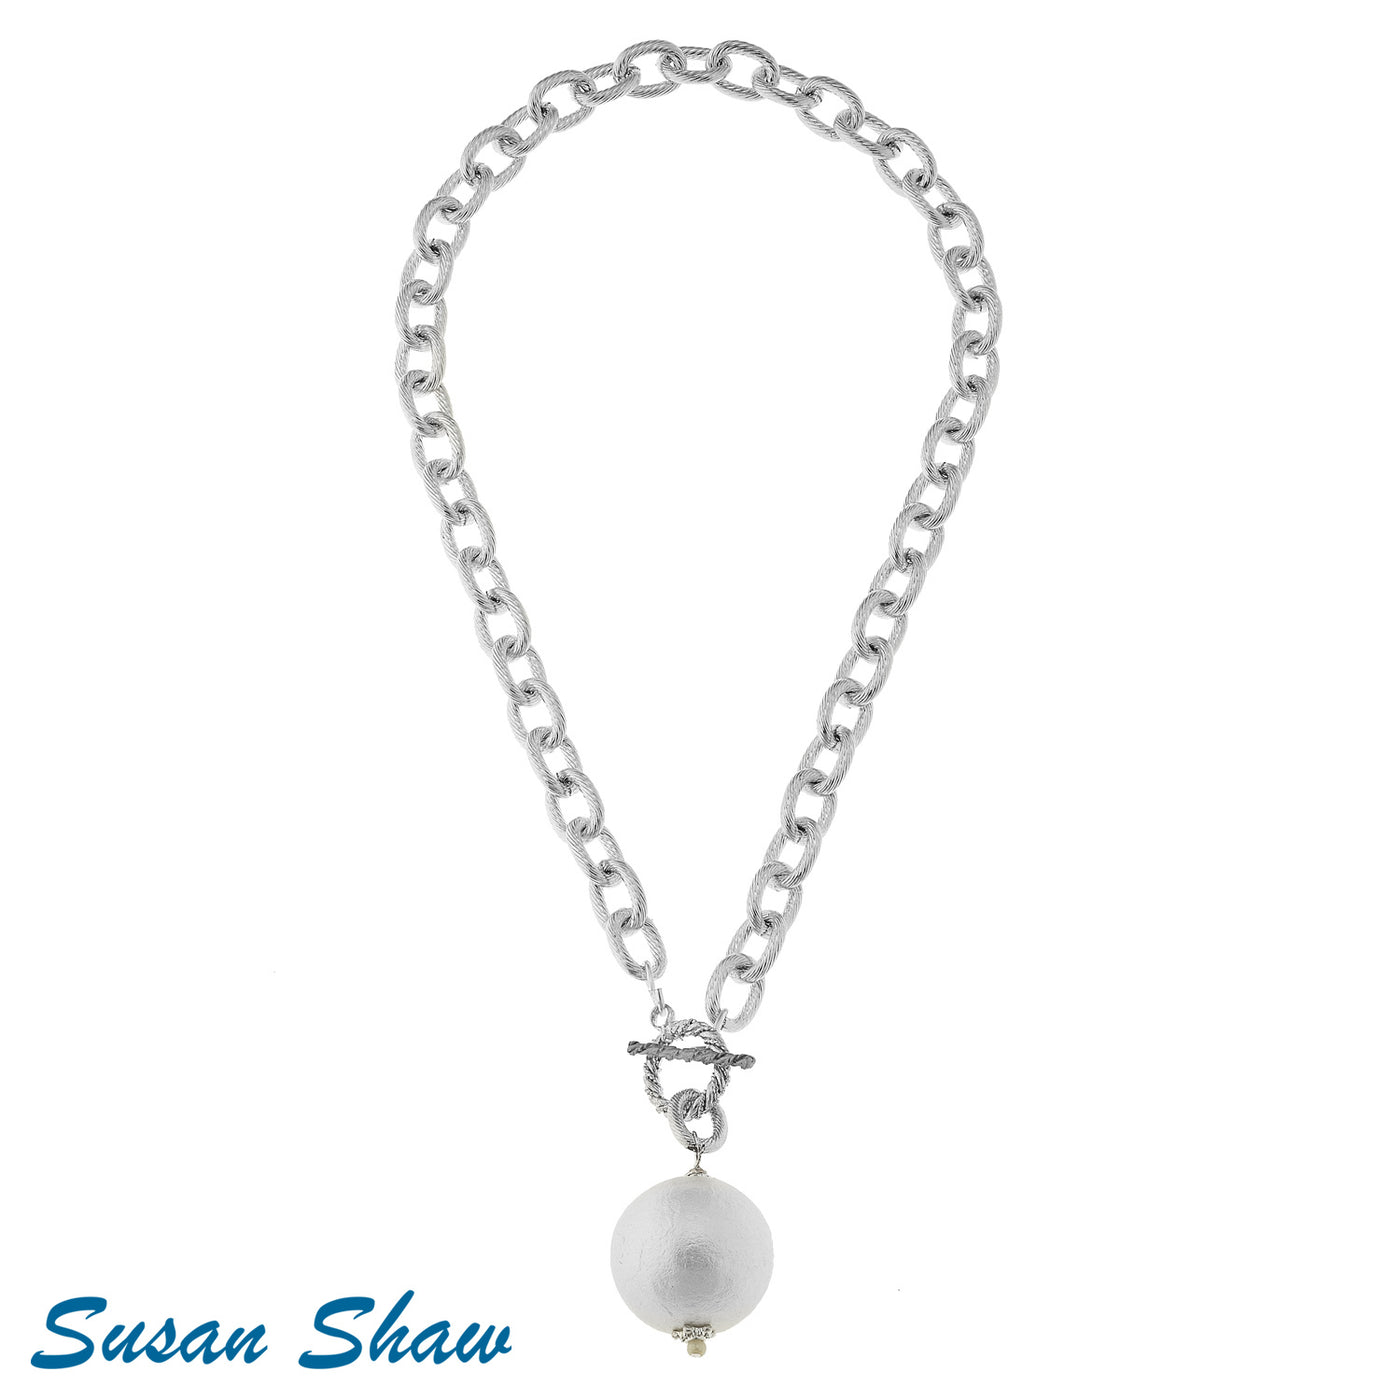 Cotton Pearl on Silver Chain Necklace with Front Toggle - Susan Shaw